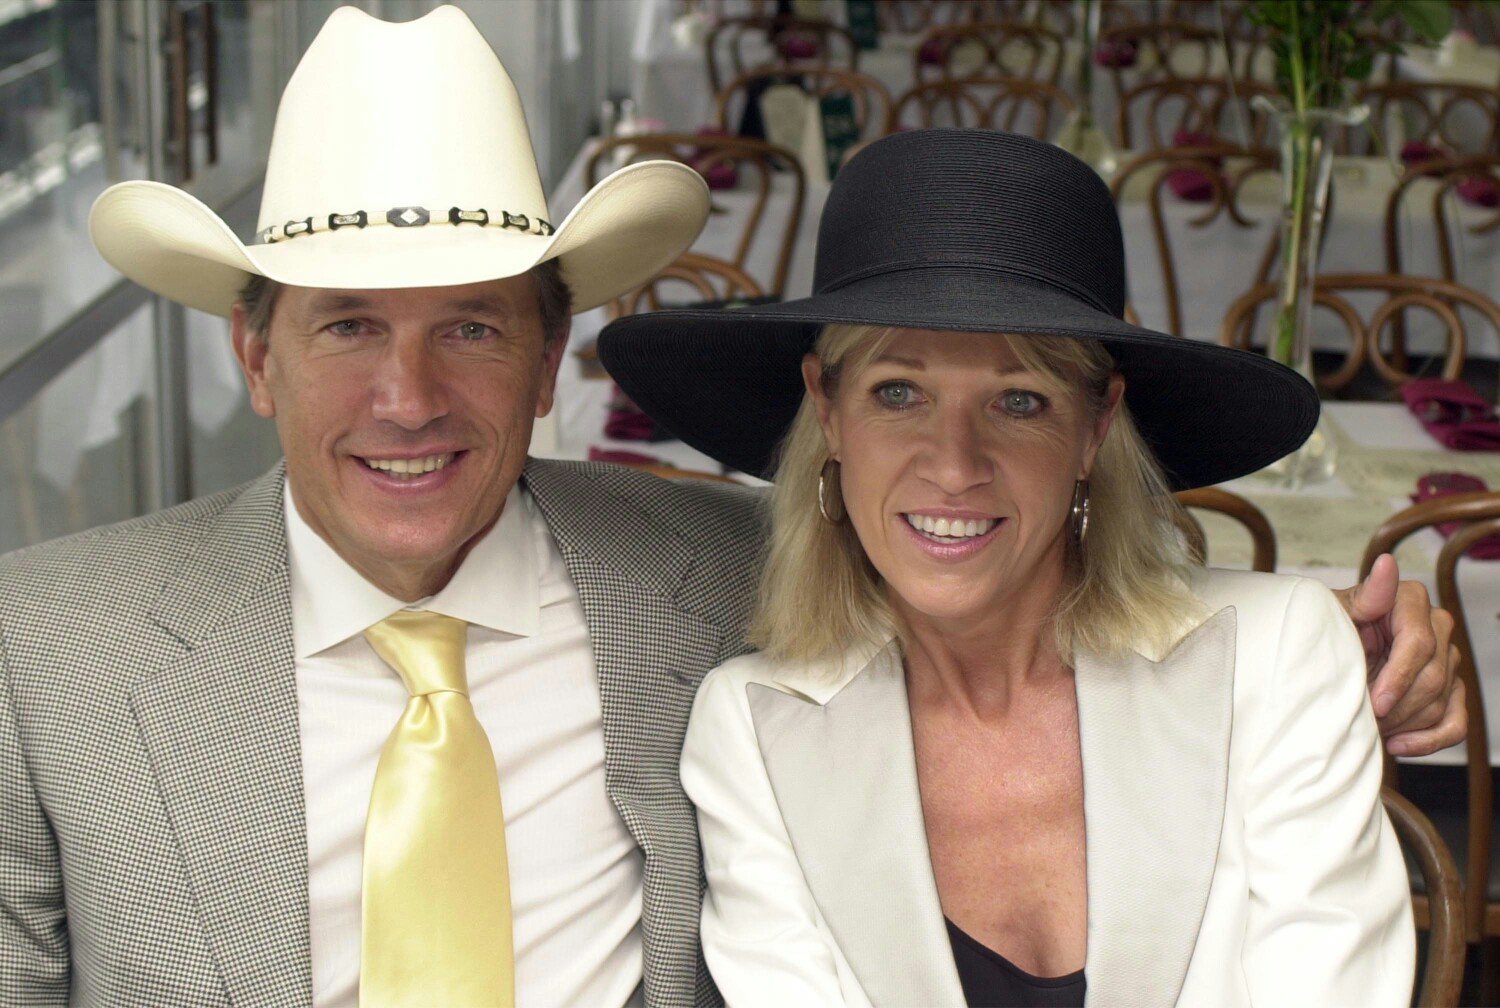 George Strait and his wife, Norma pictured at the 130th Running of the Kentucky Derby, 2004. | Photo: Getty Images